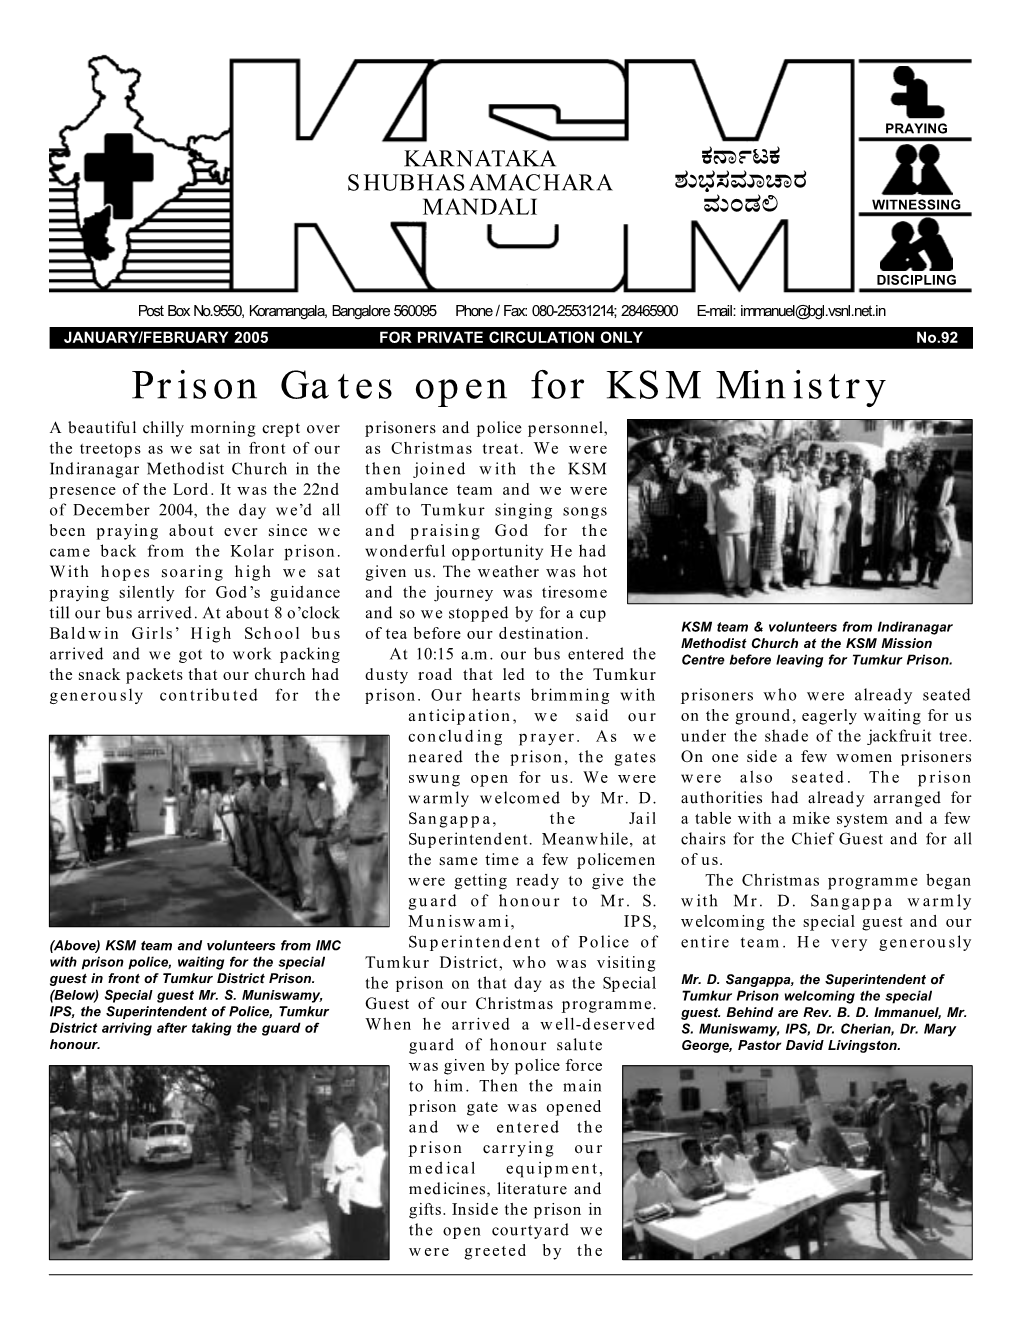 Prison Gates Open for KSM Ministry a Beautiful Chilly Morning Crept Over Prisoners and Police Personnel, the Treetops As We Sat in Front of Our As Christmas Treat